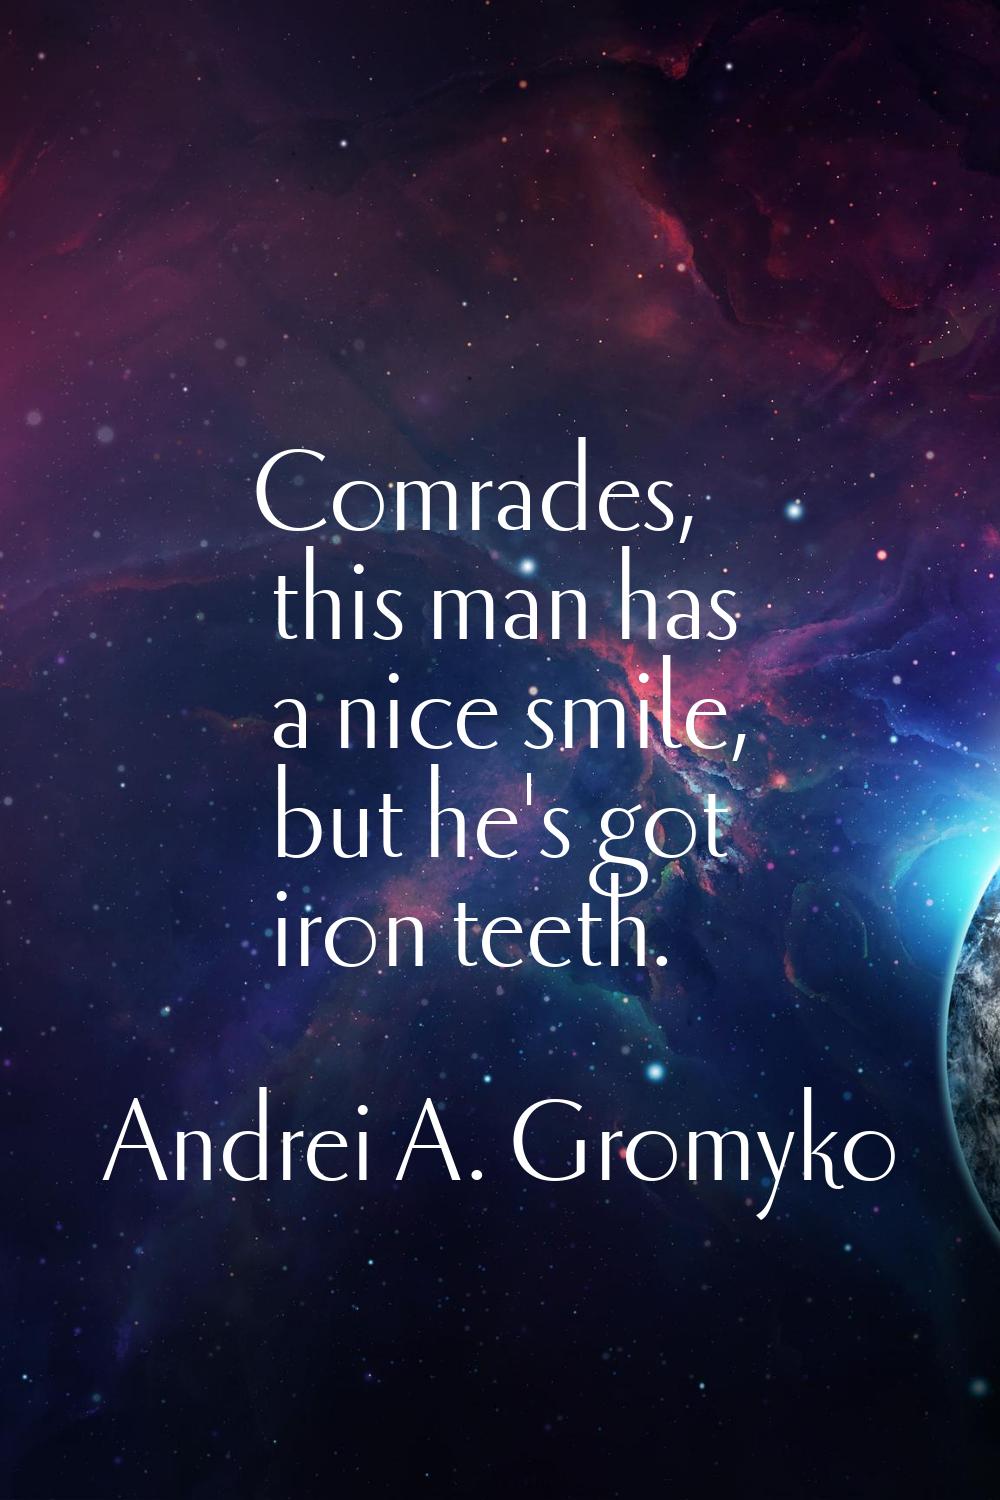 Comrades, this man has a nice smile, but he's got iron teeth.